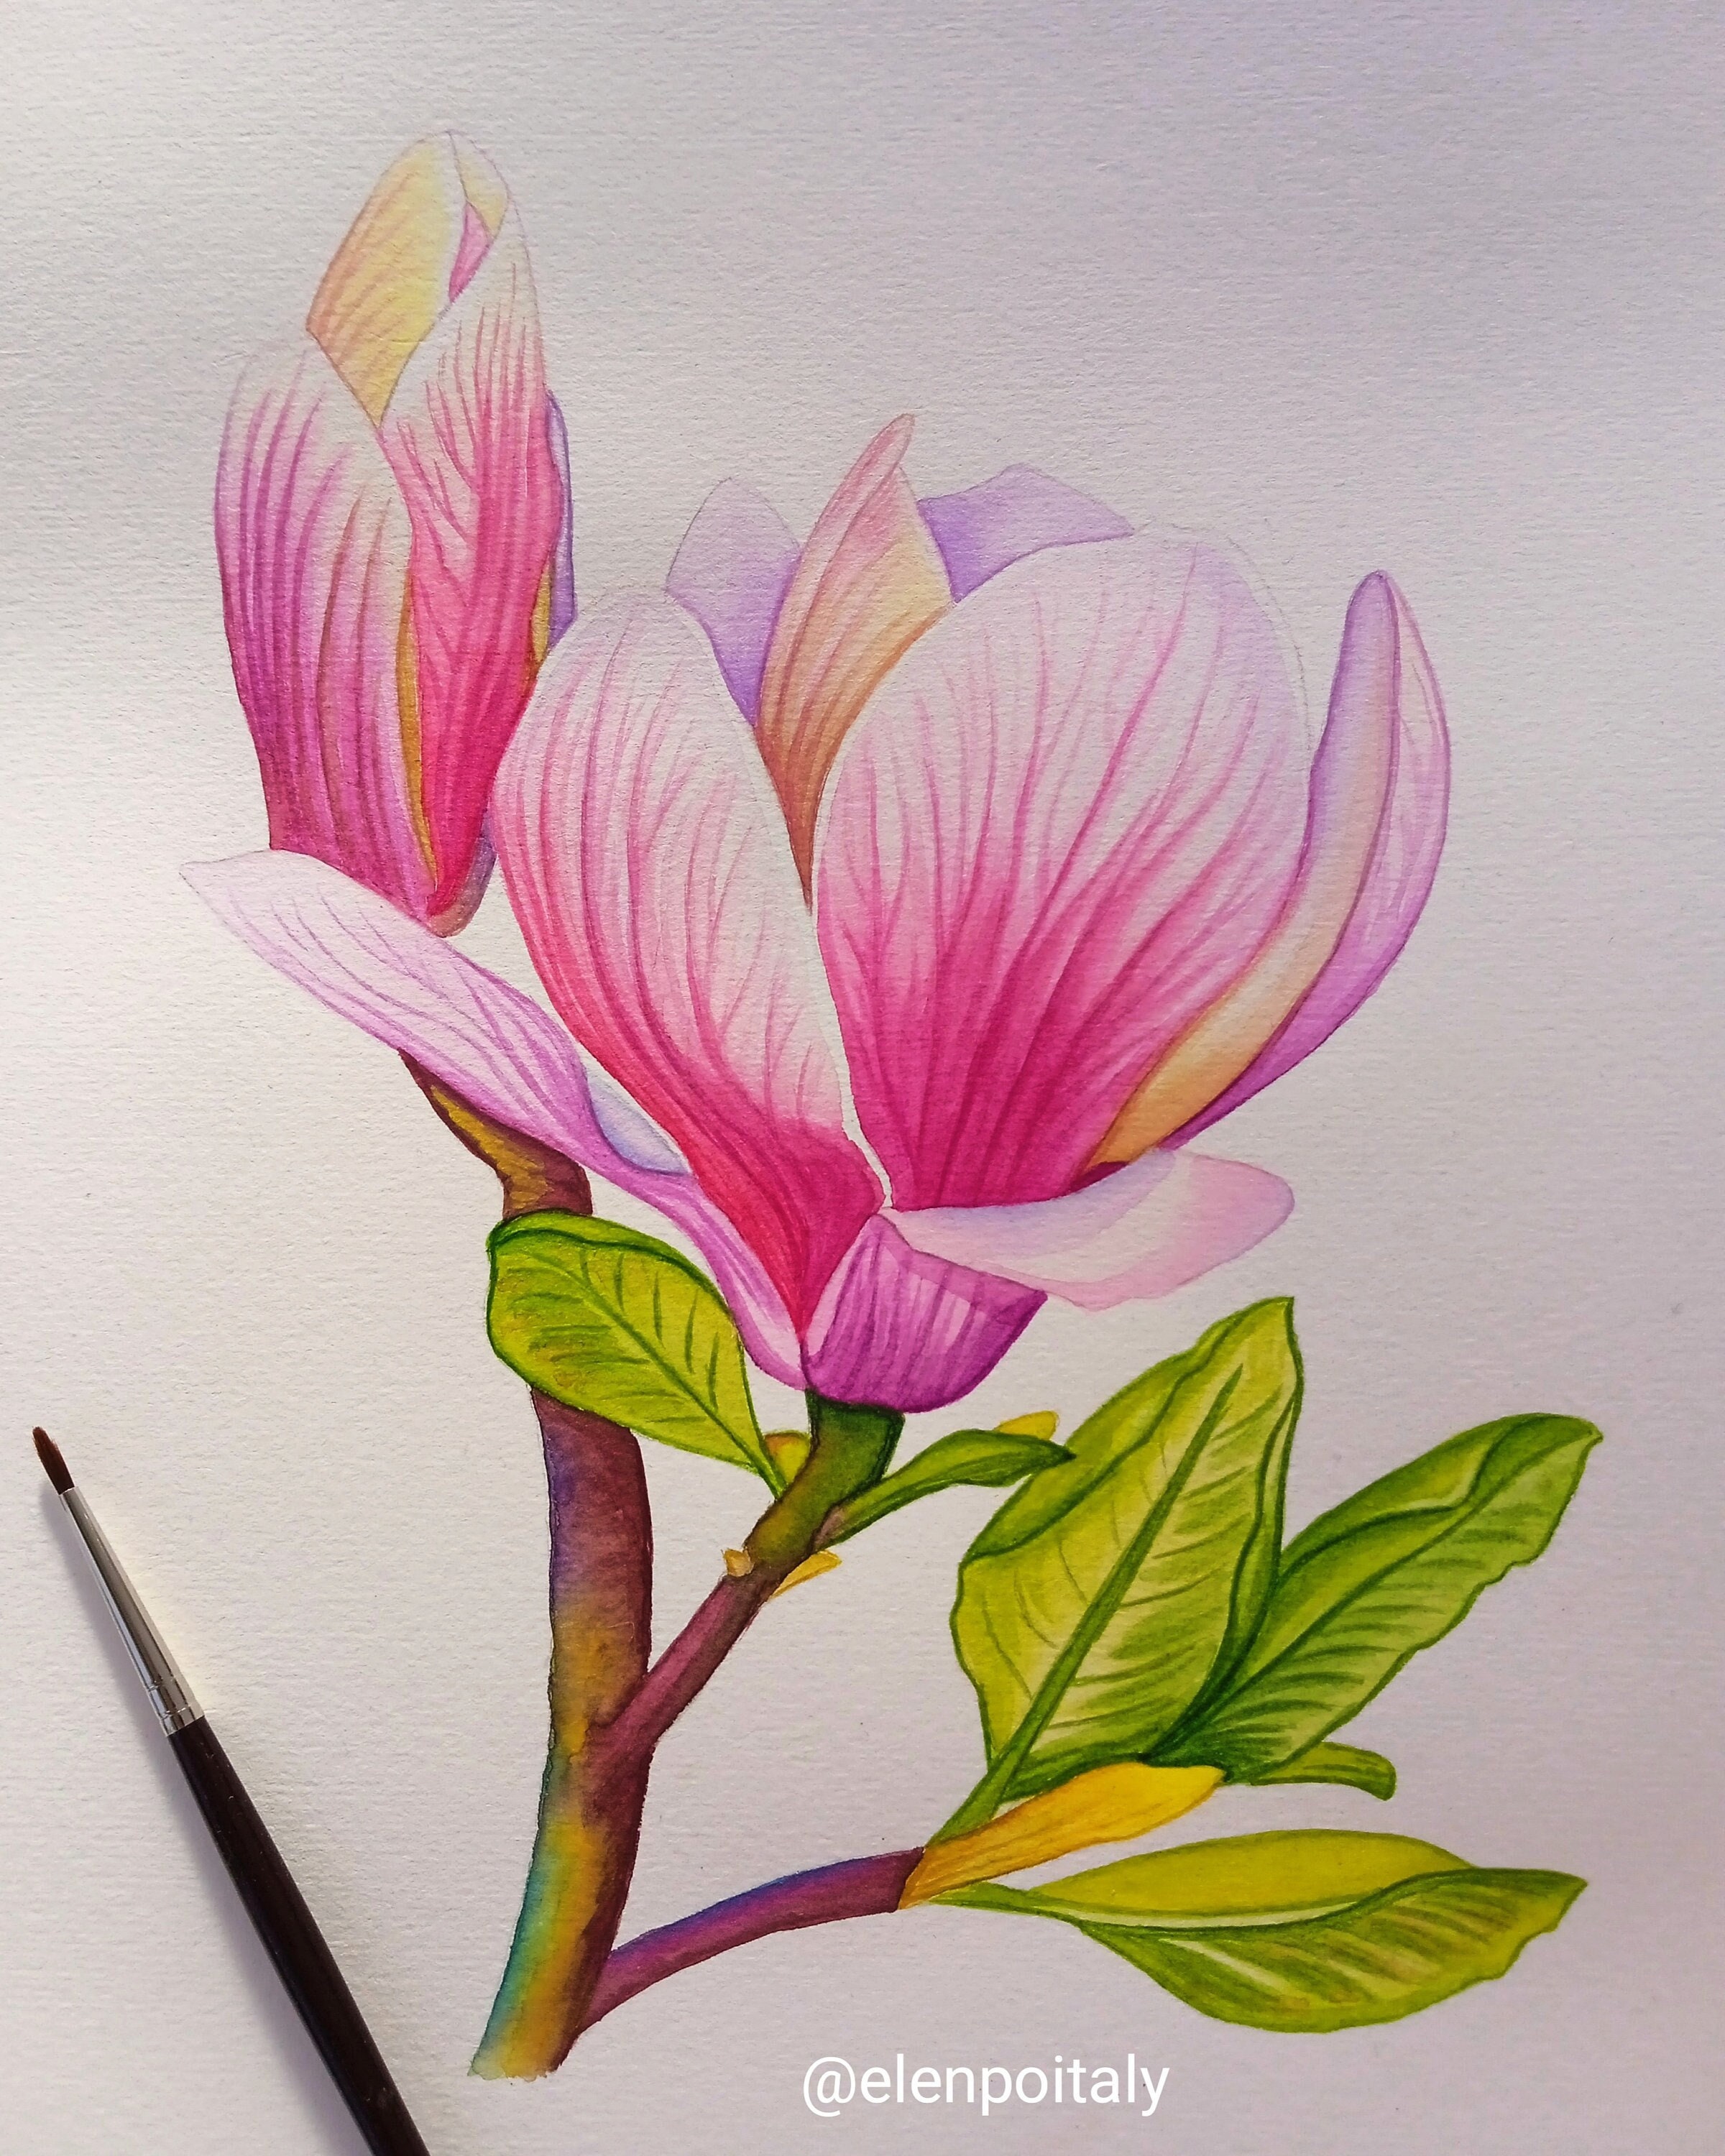 How to Draw a Magnolia Flower - A Step-by-Step Tutorial